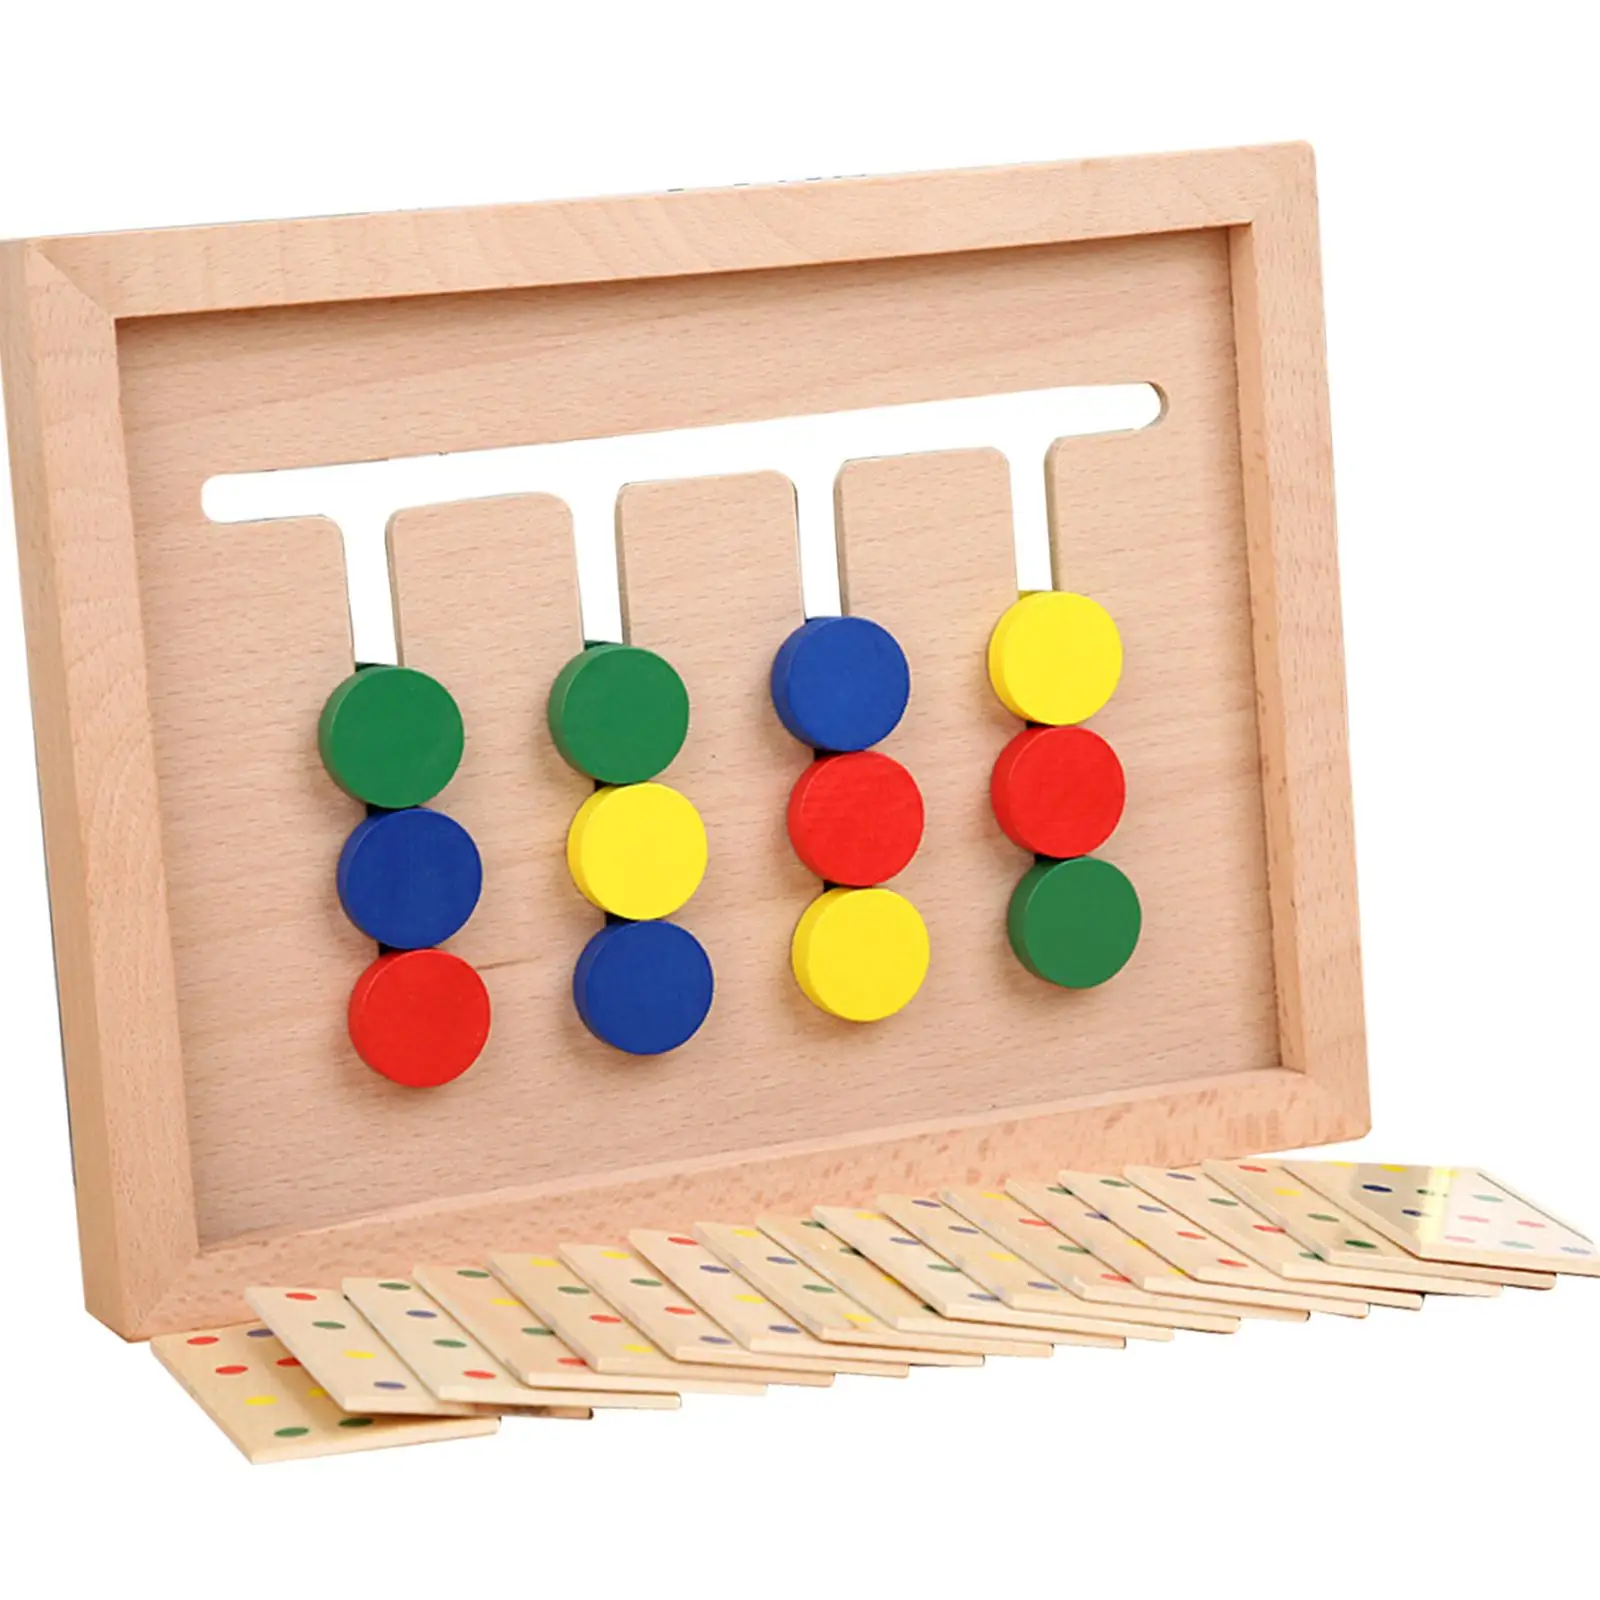 Four Colors Game Educational Toy Cognition Hand Eye Coordination for Bedroom